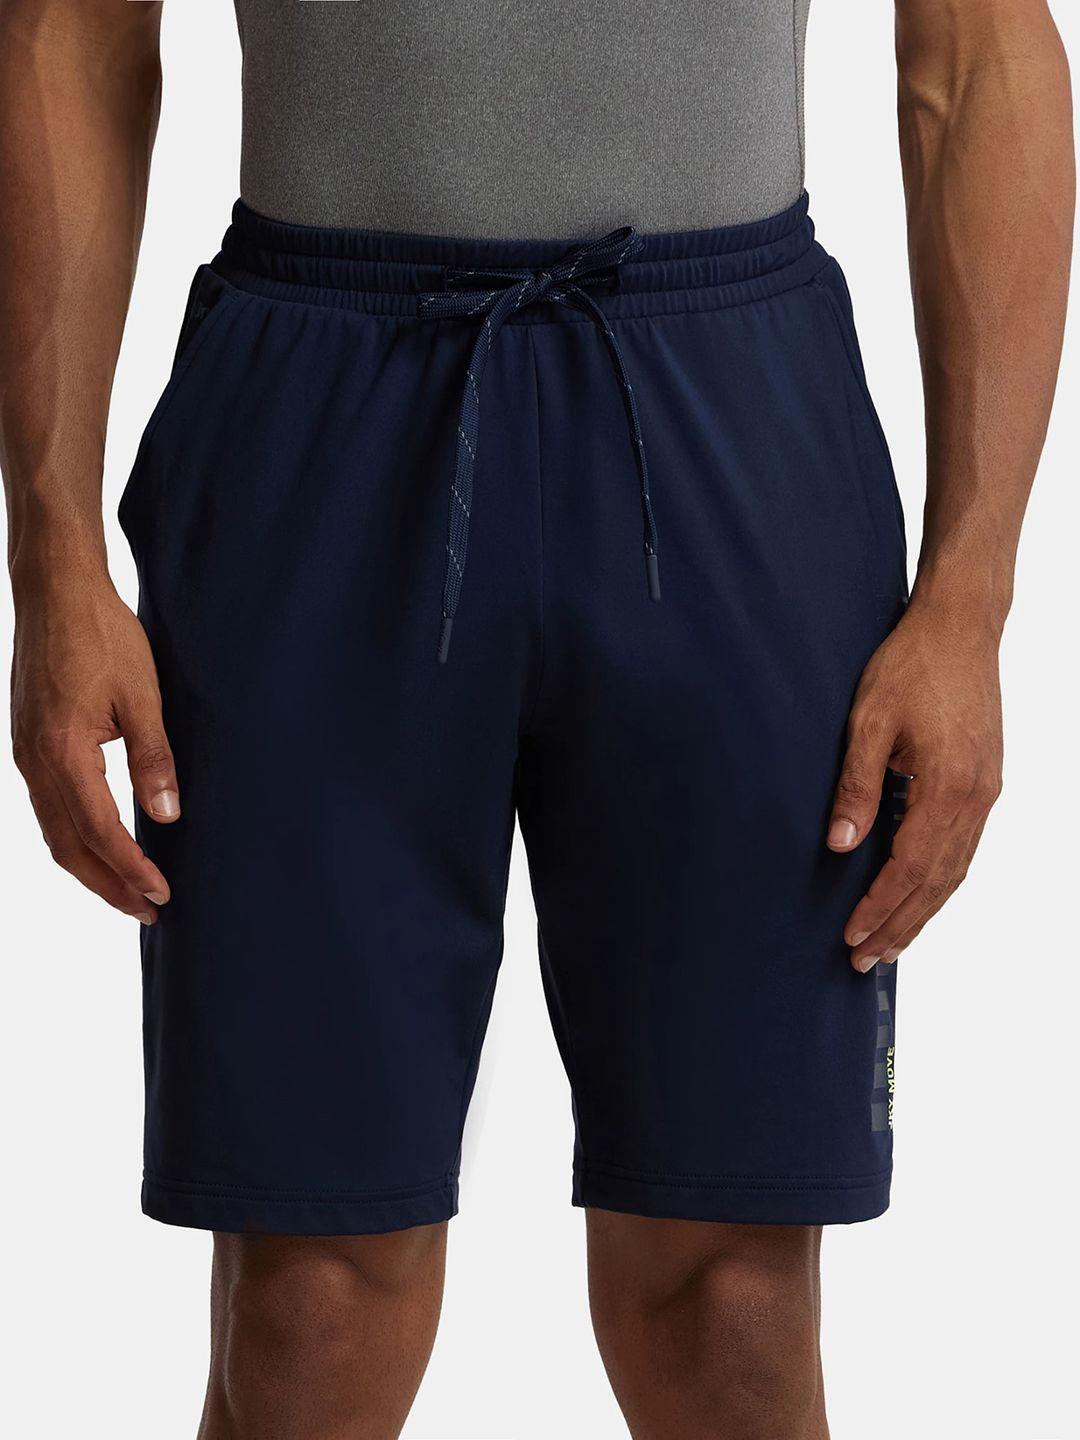 jockey men training or gym sports shorts with antimicrobial technology